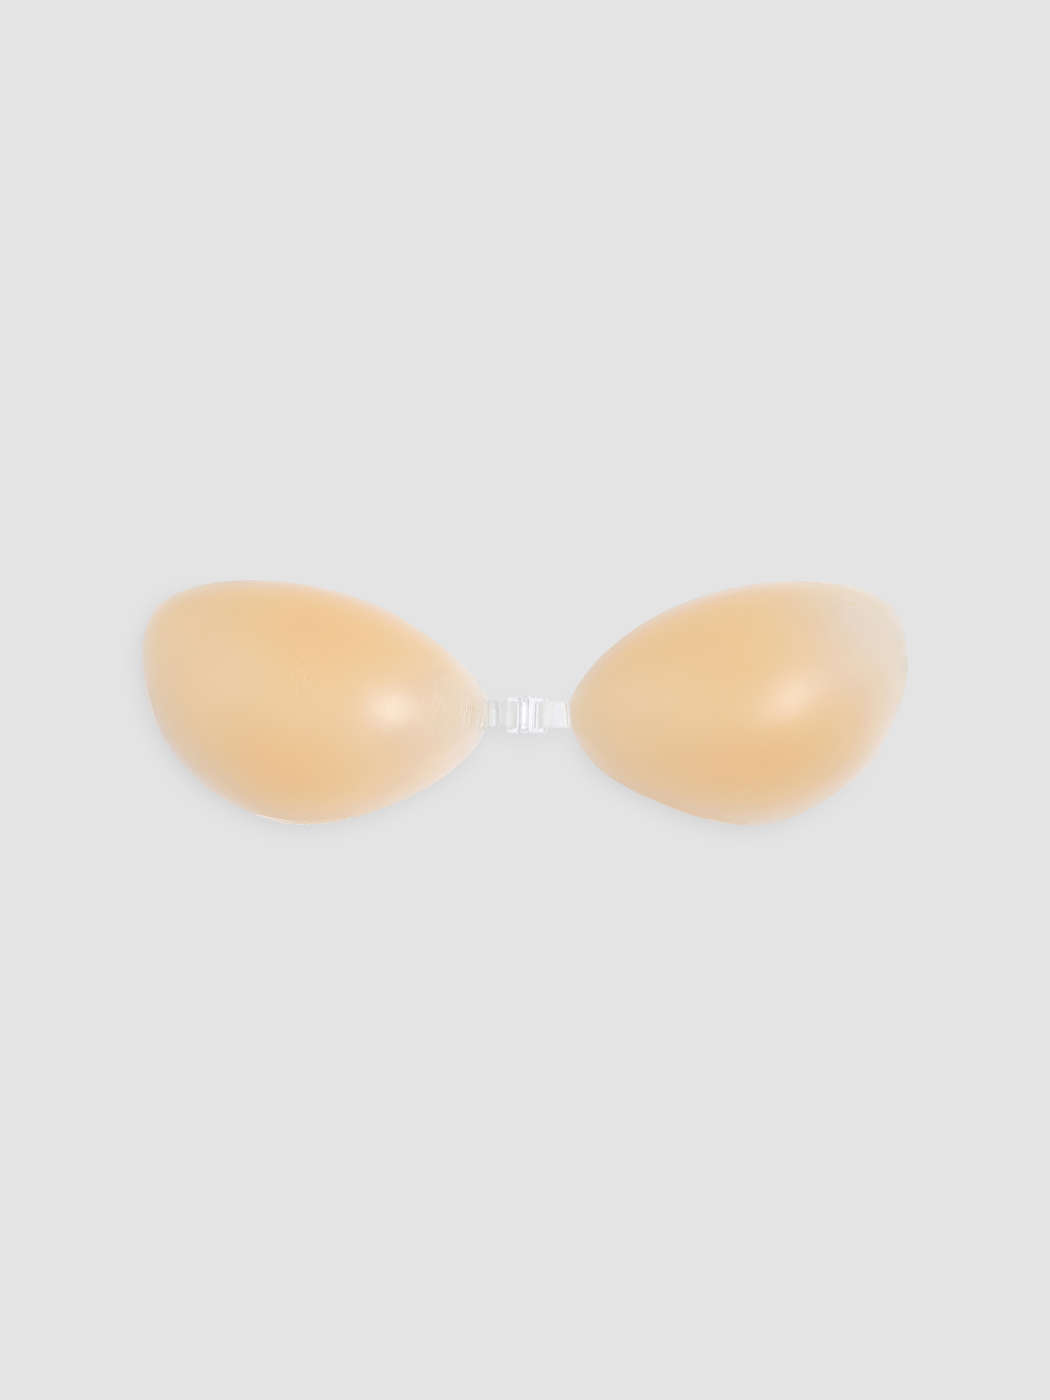 Reusable Push Up Adhesive Silicone Nipple Cover - Cider